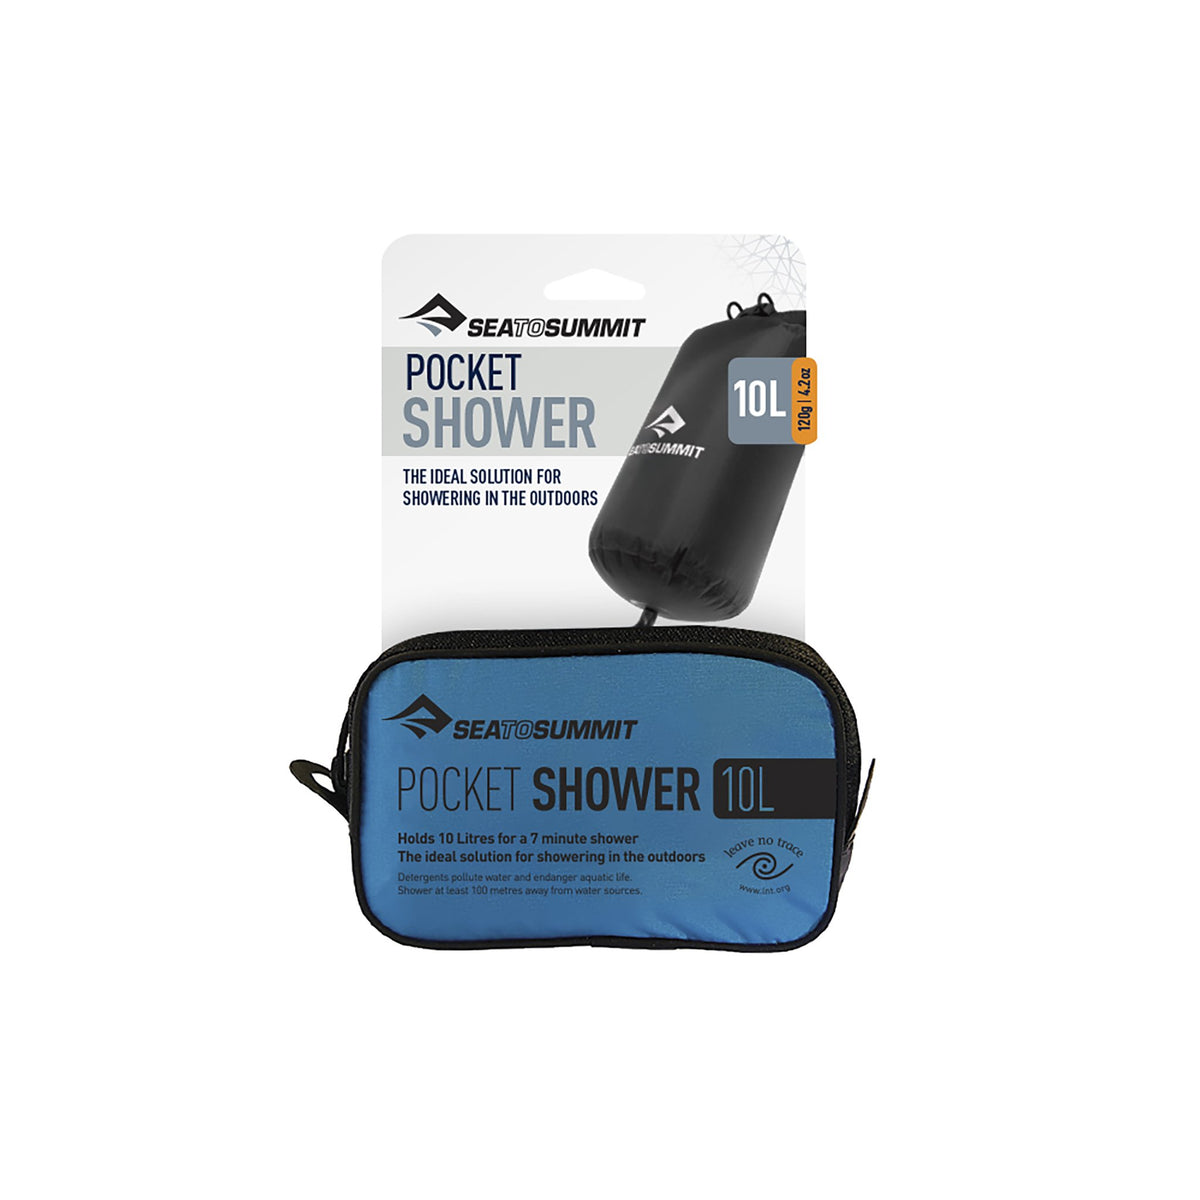 Sea To Summit Pocket Shower packed up